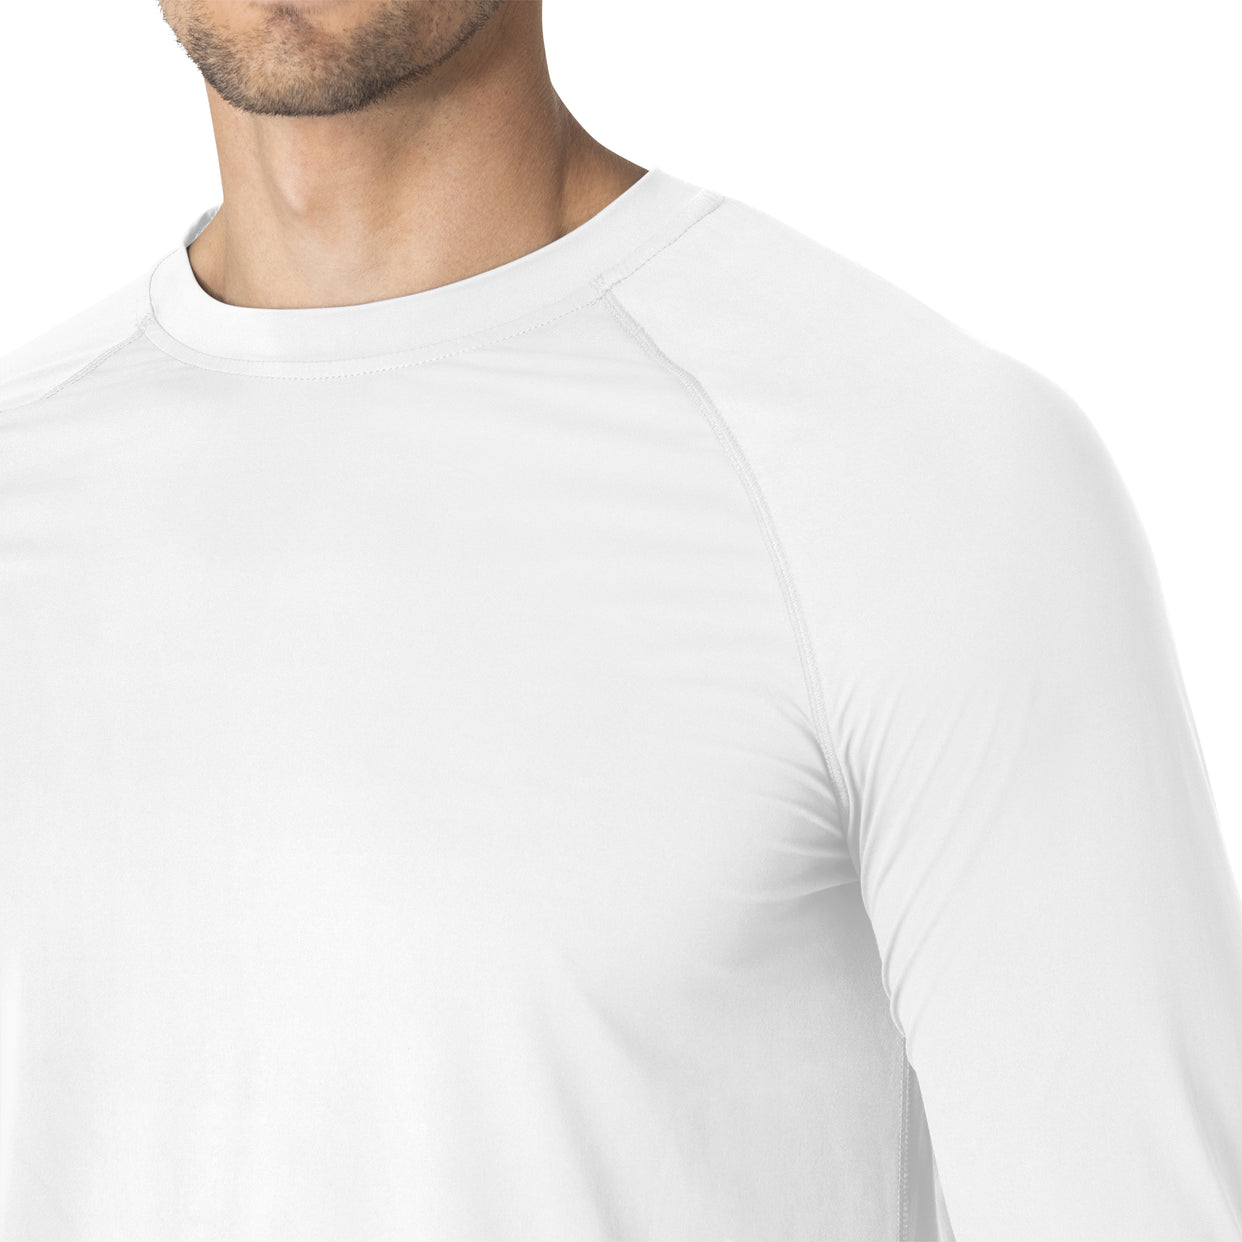 Force Sub-Scrubs Men's Performance Long Sleeve Tee White front detail